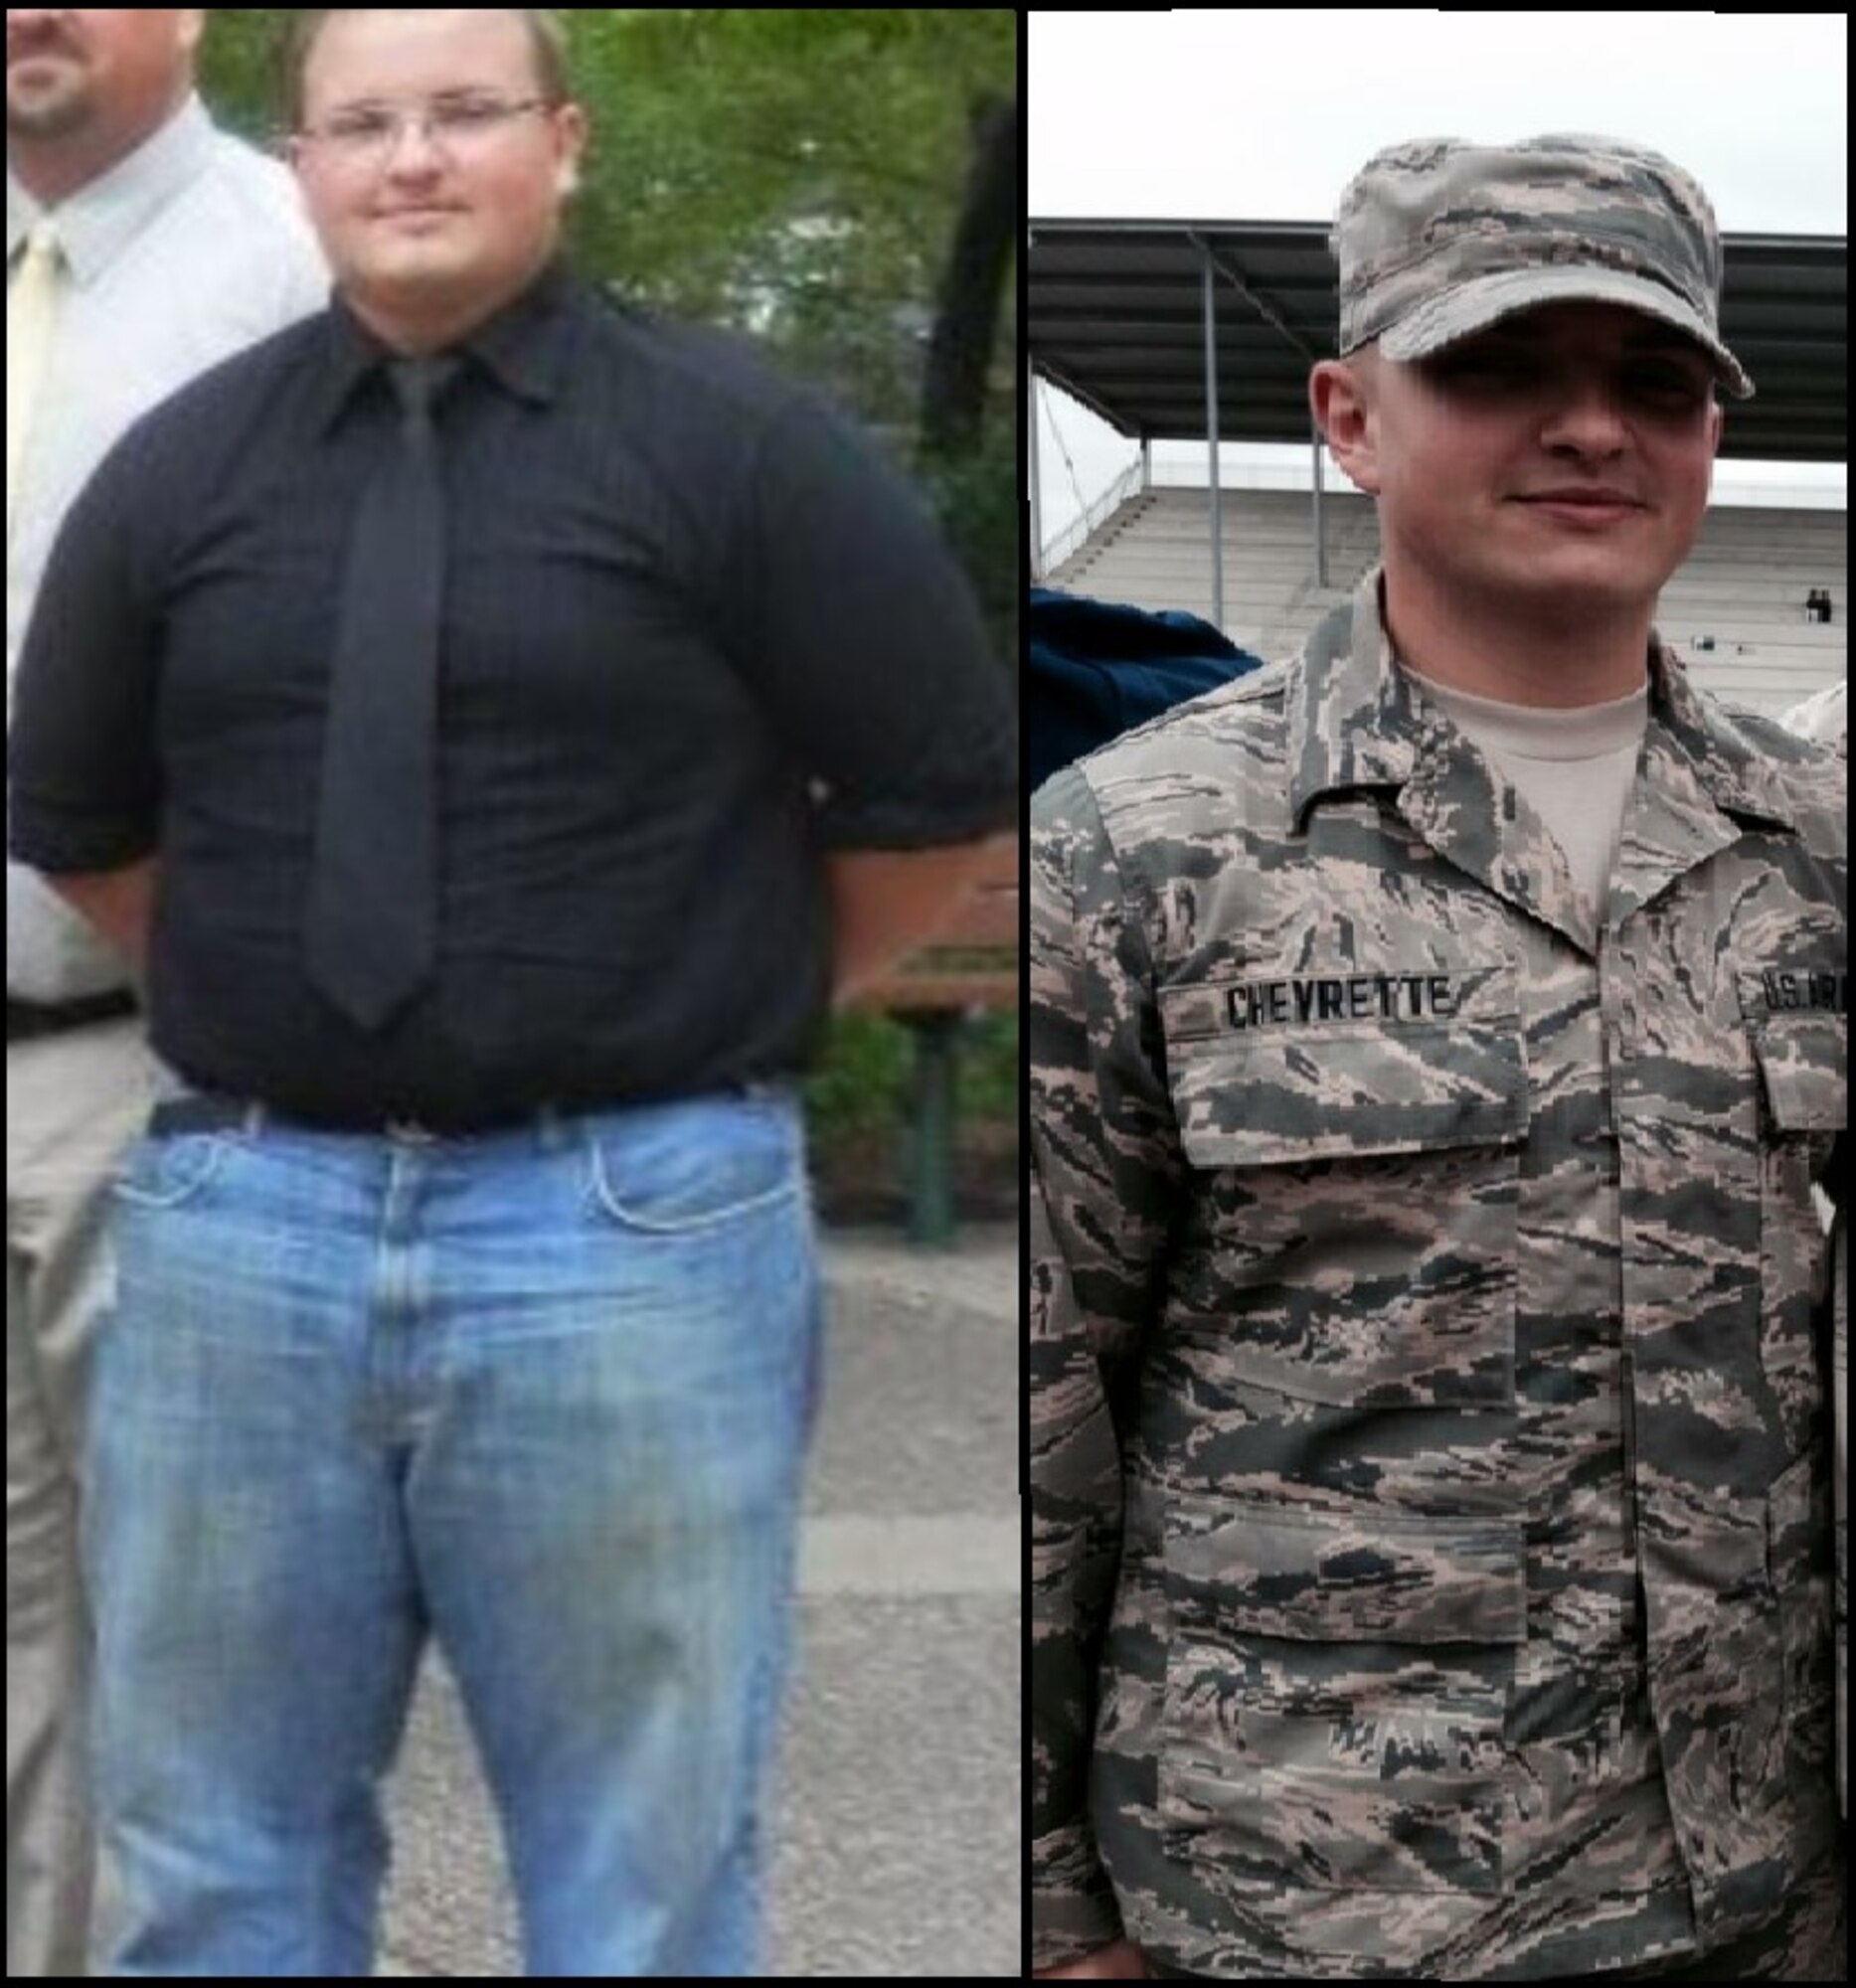 Airman 1st Class Dan Chevrette, 22nd Logistics Readiness Squadron heavy equipment mechanic, dropped approximately 100 pounds in order to enlist in the Air Force.  “Being in the Air Force was something I’ve always dreamed about as a kid, so I knew I had to enlist no matter what it took.” said Chevrette.